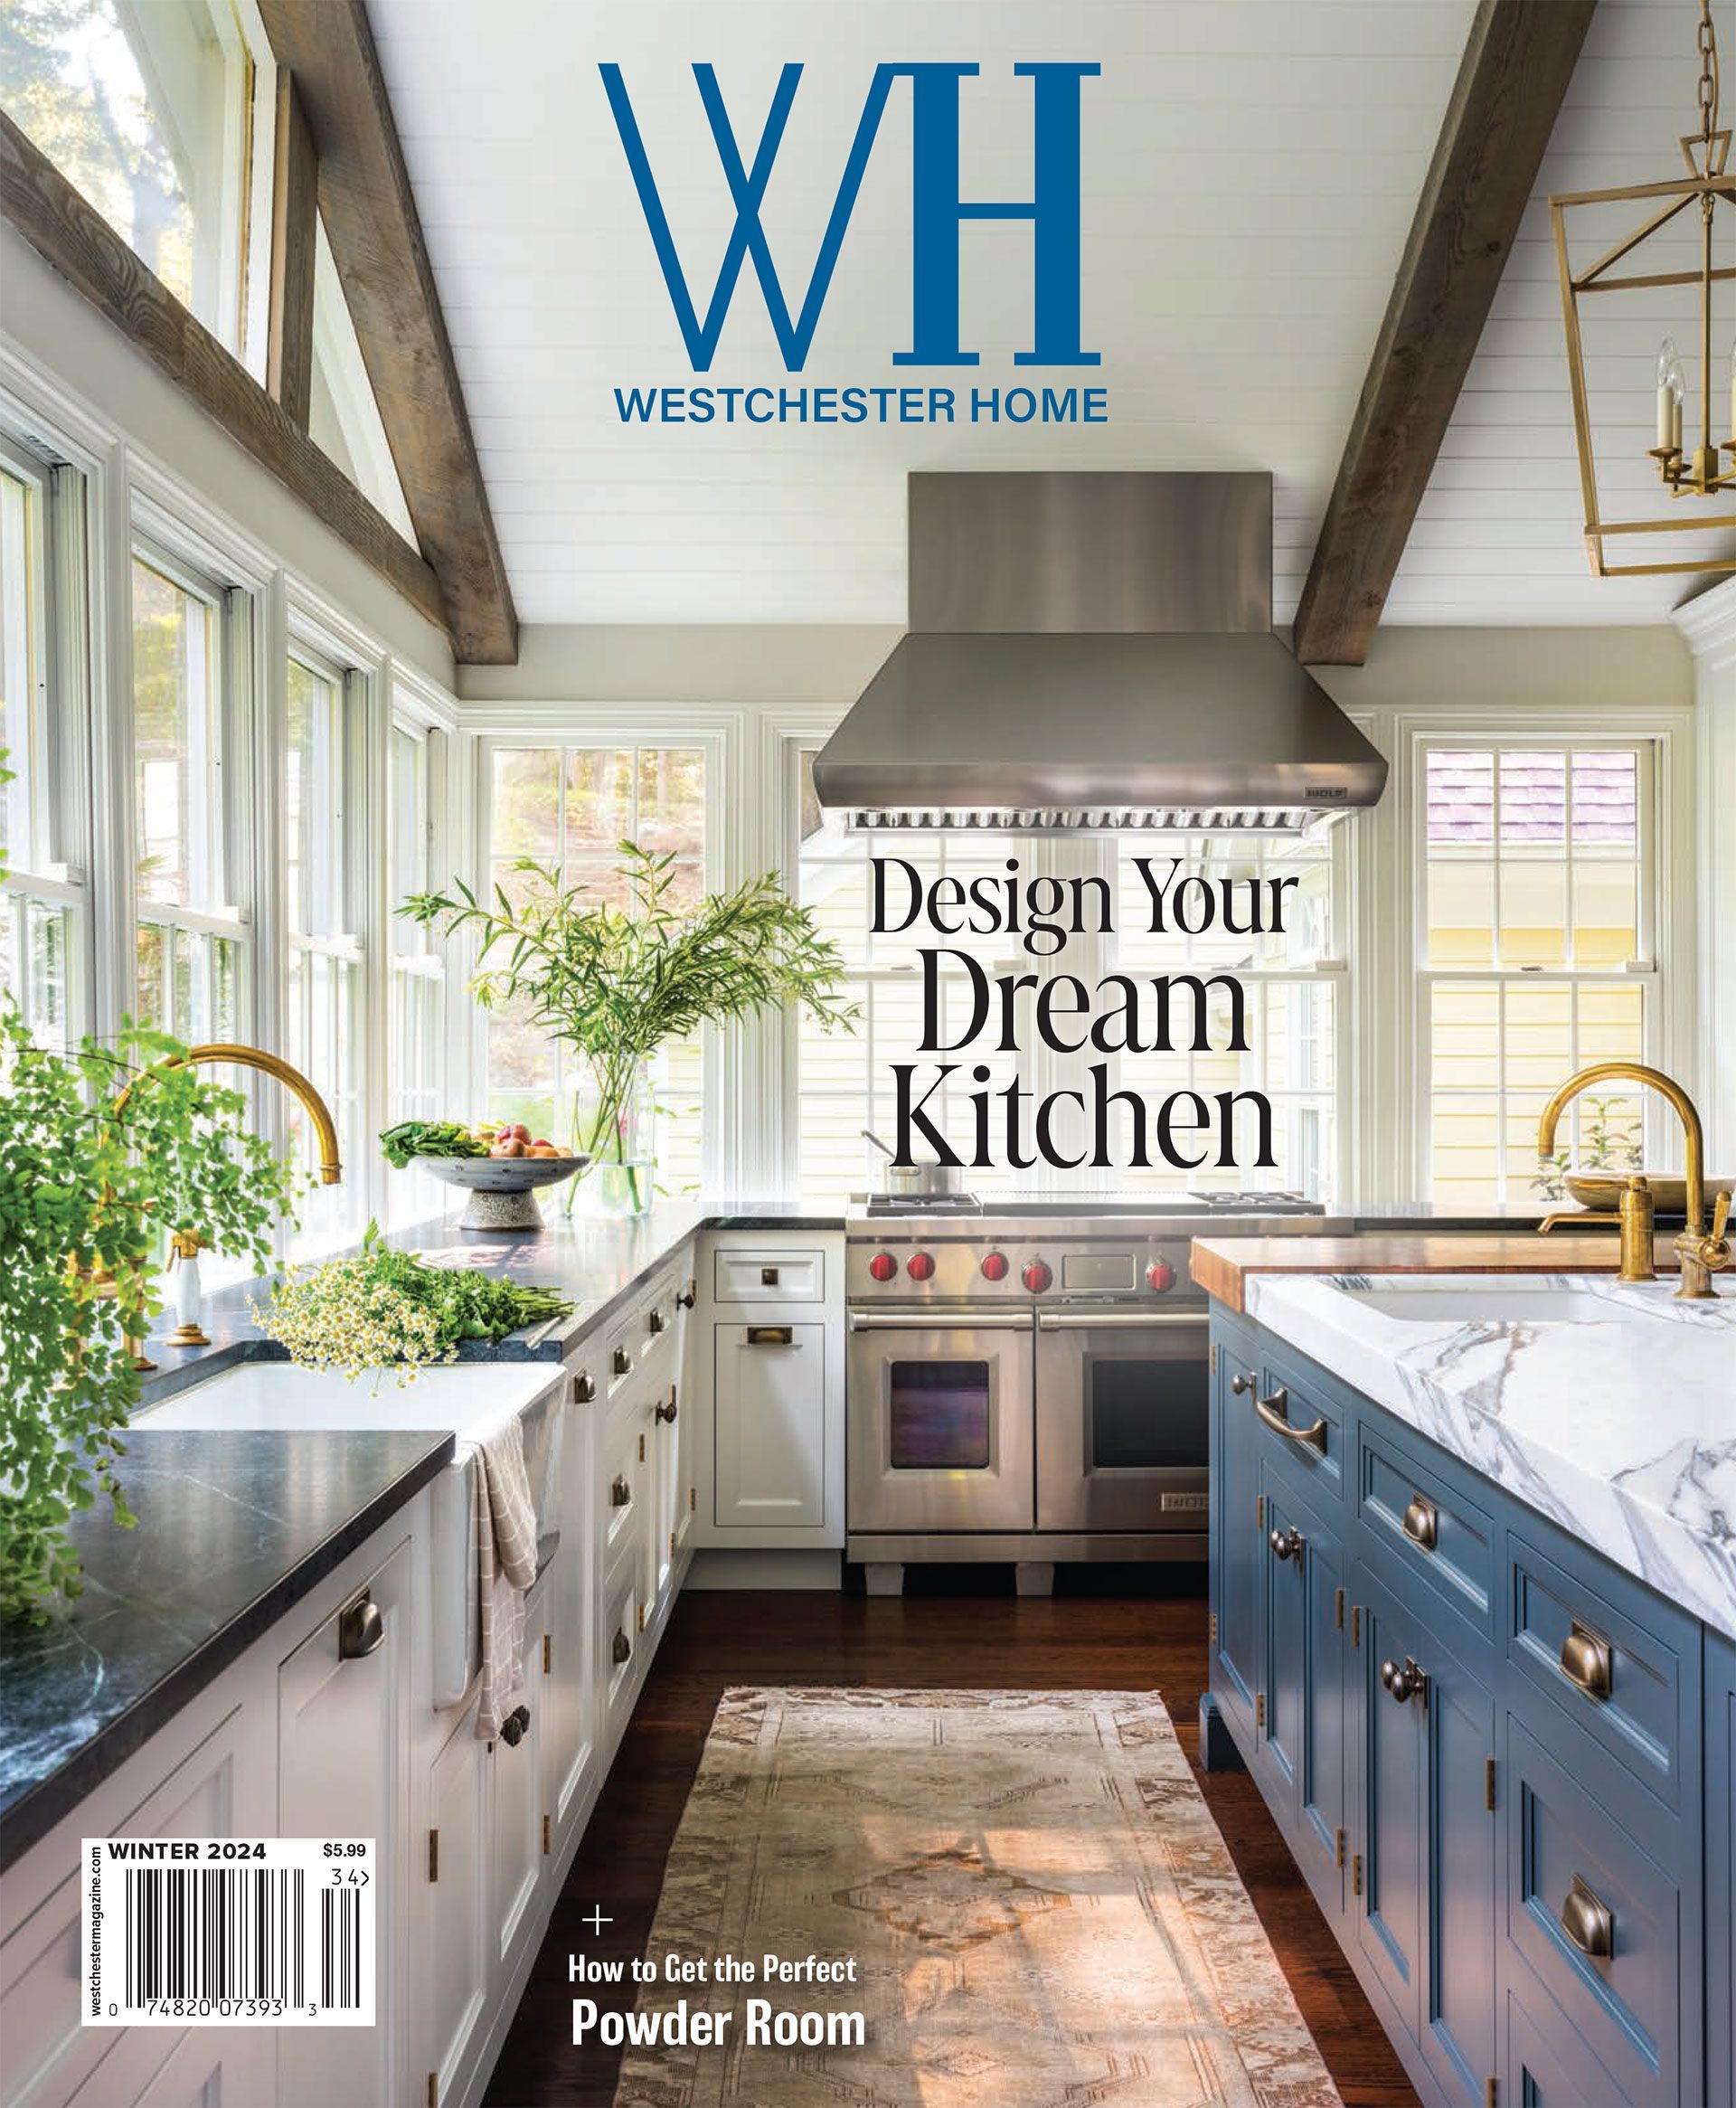 As seen in Westchester Home Magazine Winter 2023